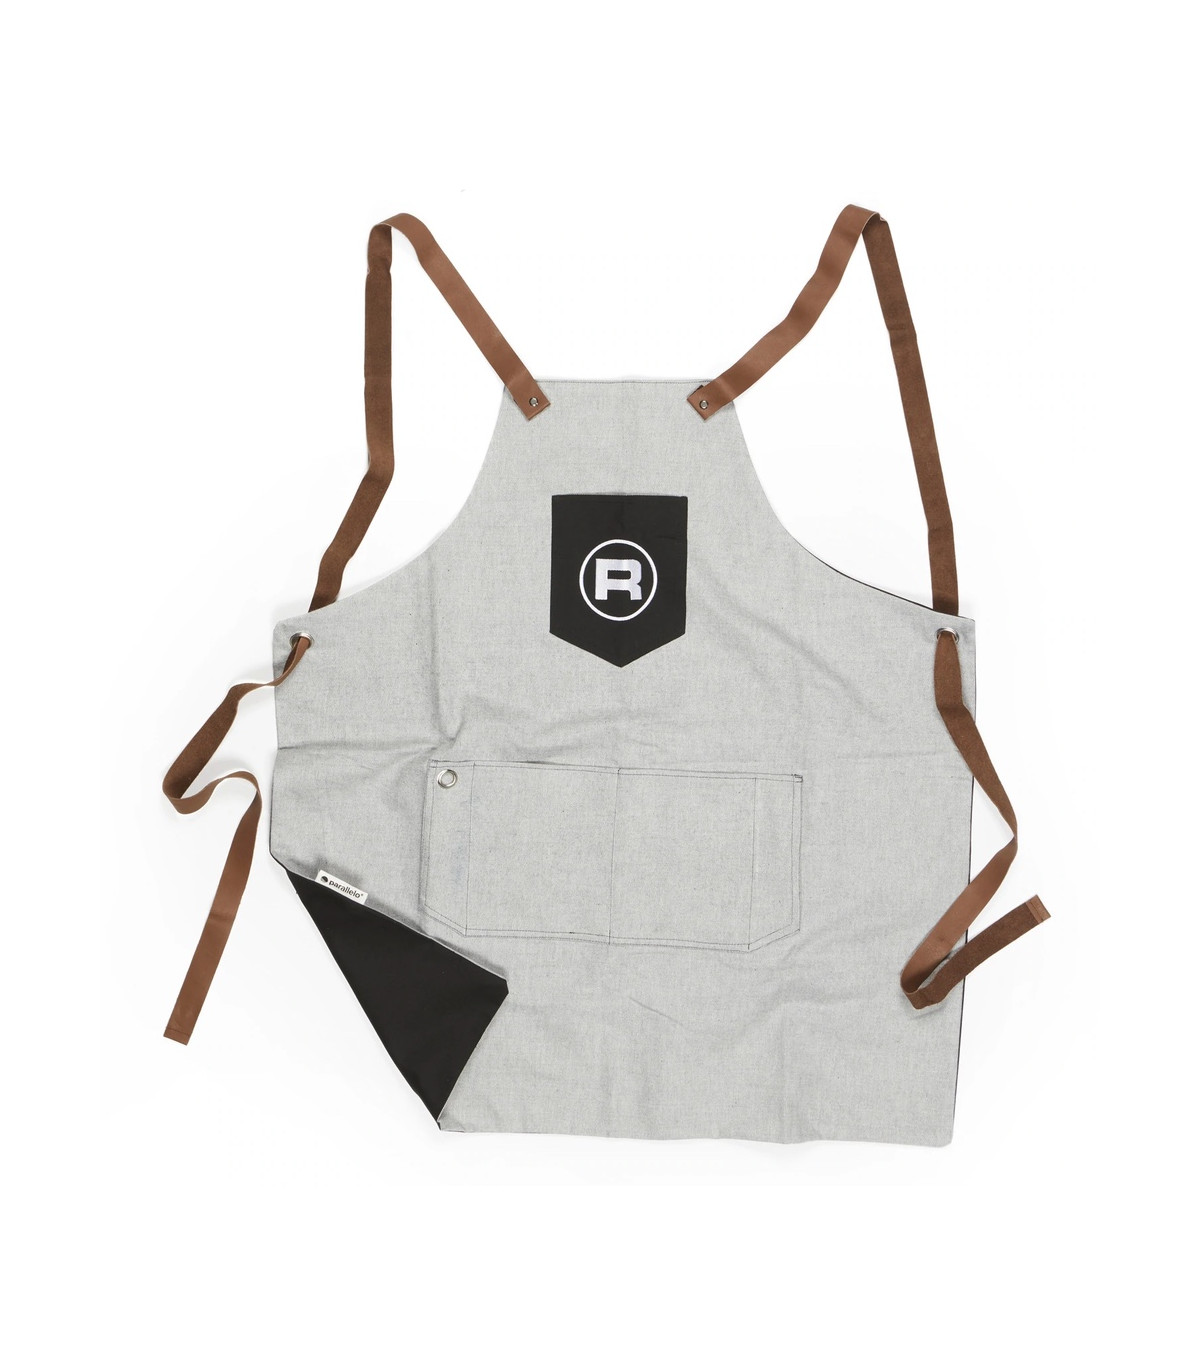 NEW! - Artist Apron - Two Tone - Magnet Gray and Stone